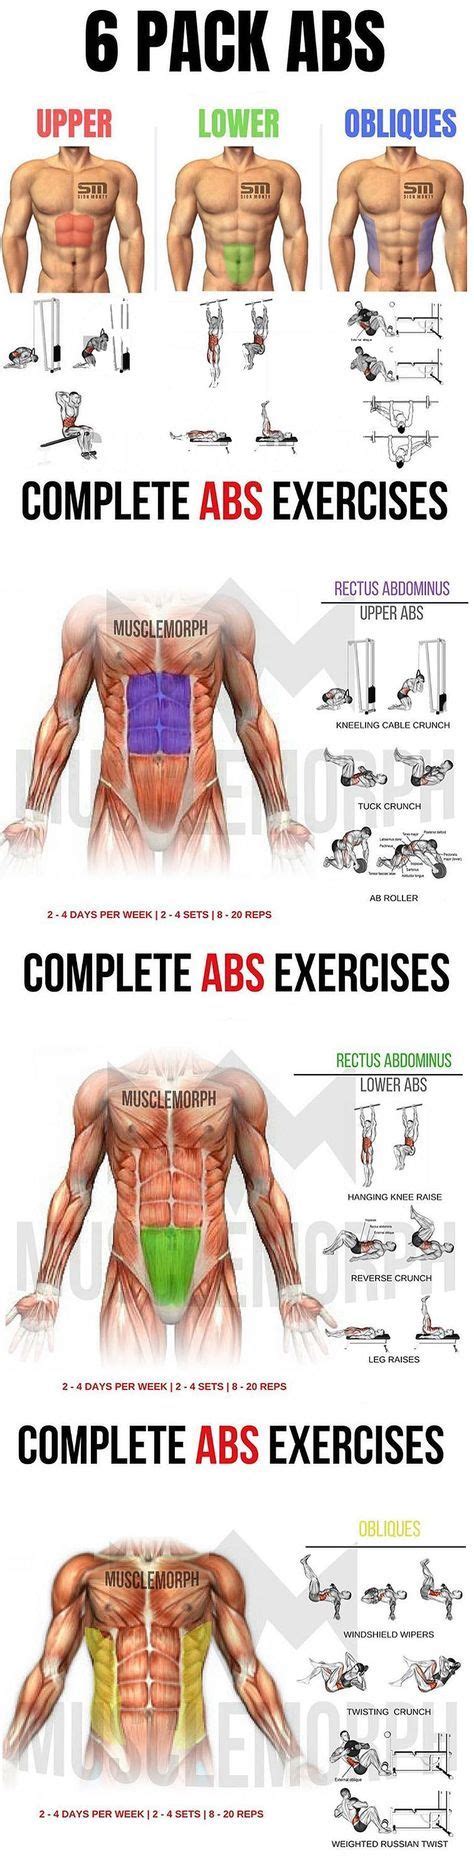 Pack Abs Abs Workout Abs Workout Routines Workout